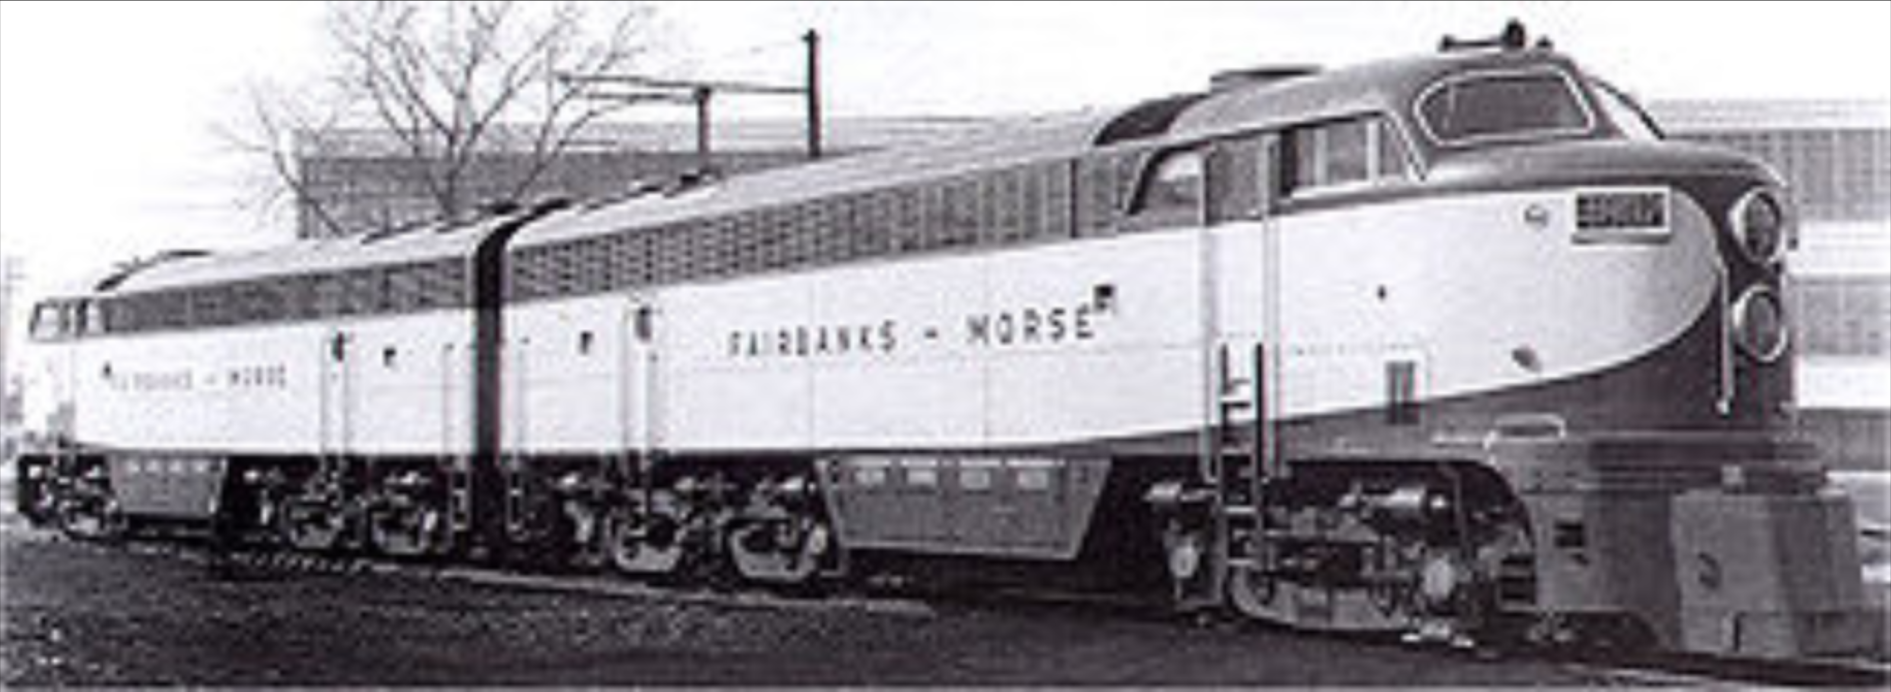 https://static.wikia.nocookie.net/entertainment-trains/images/b/b7/Fairbanks_Morse_4802_demonstrator.png/revision/latest?cb=20180207000335